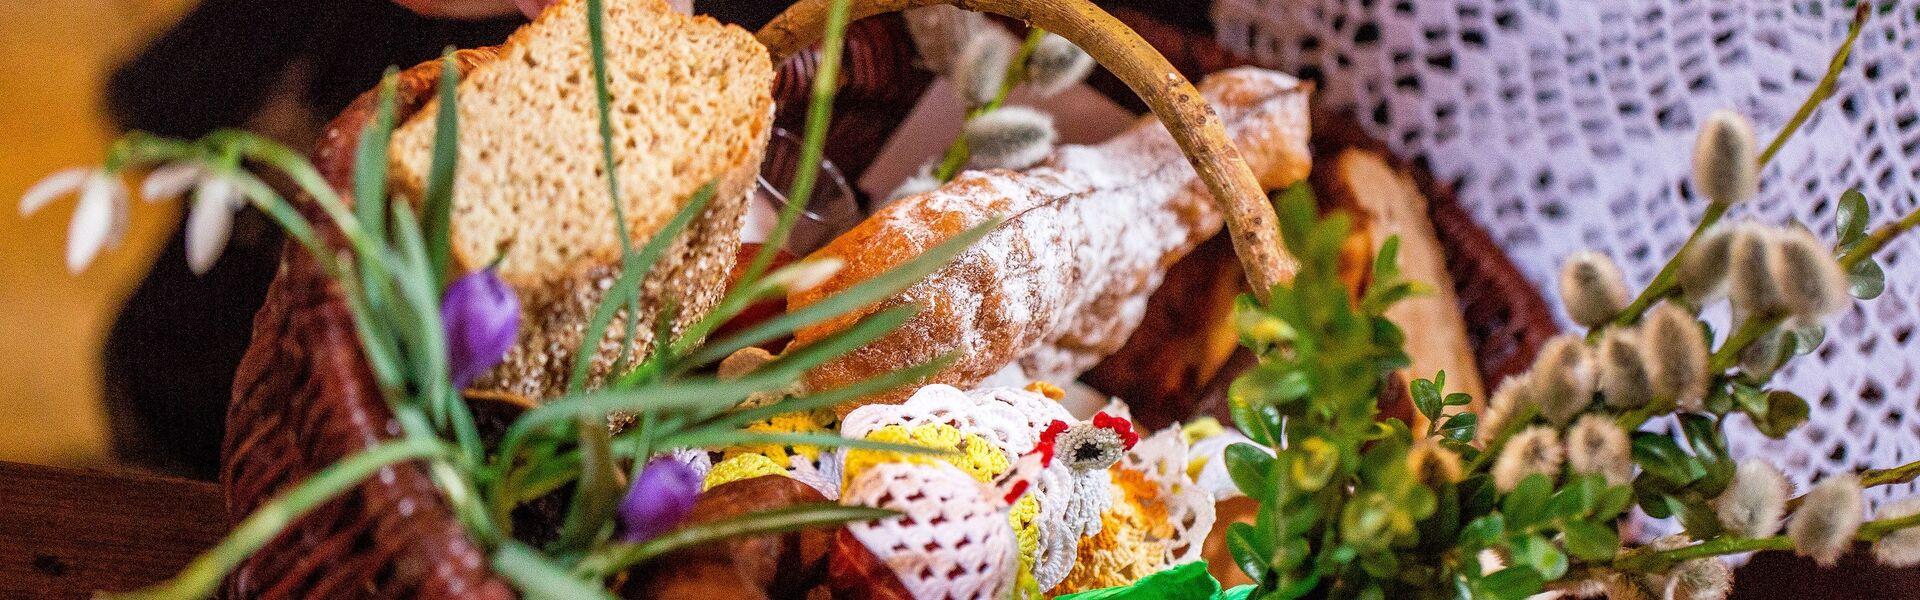 Wicker Easter basket with food